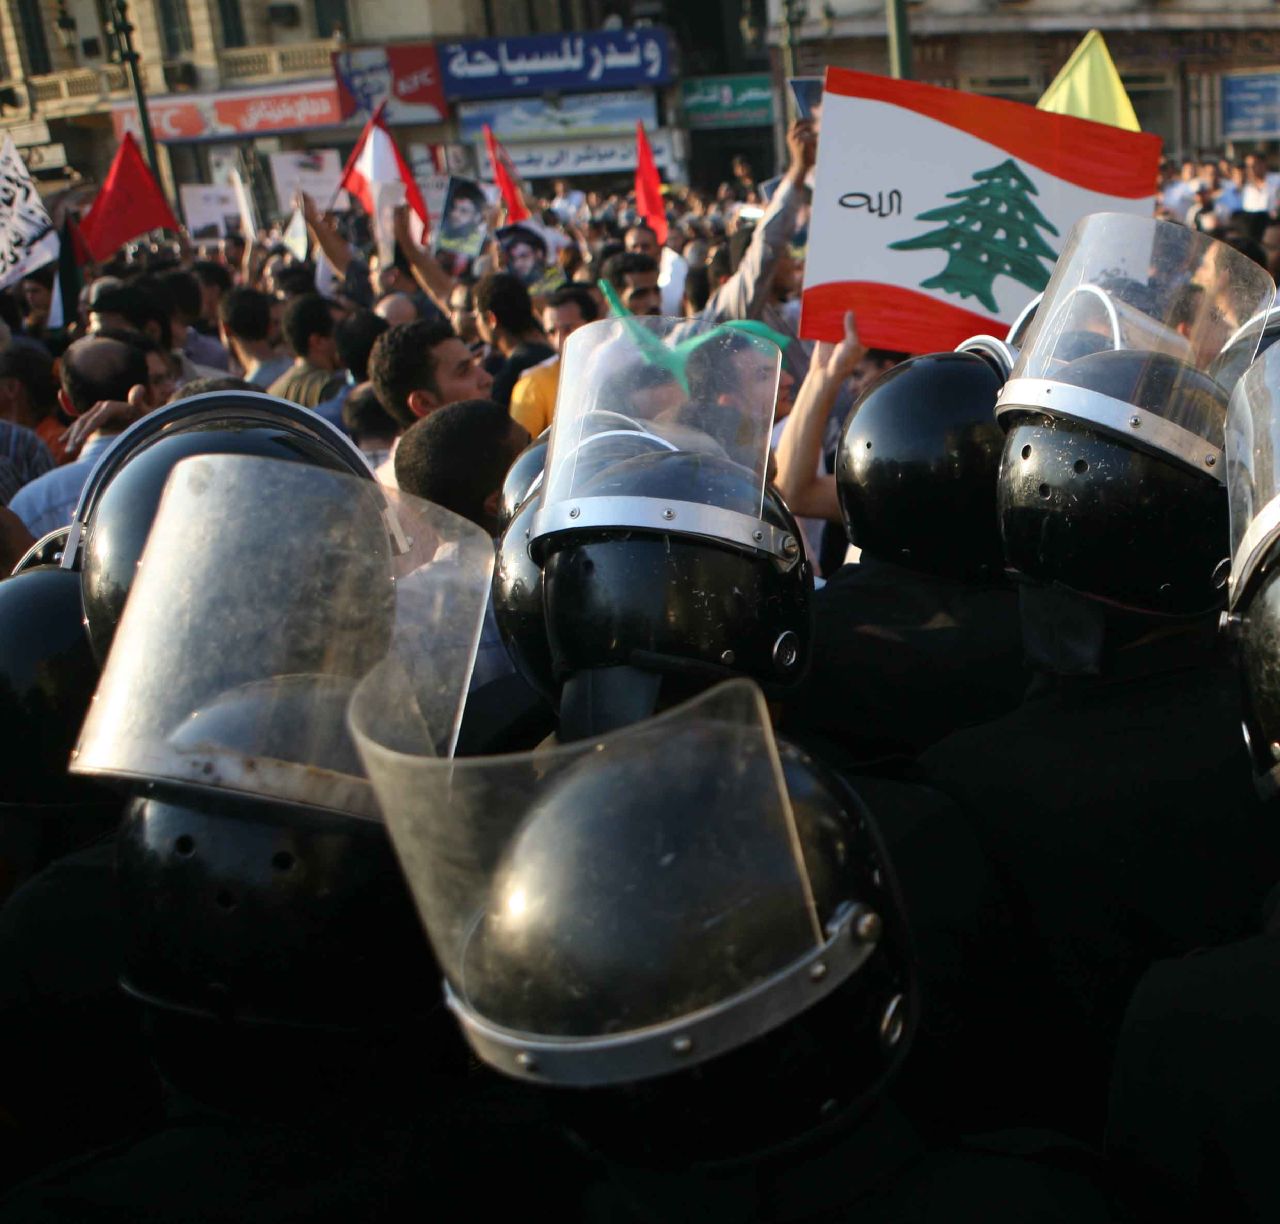 CSF troops in Tahrir Square formed a second circle around the plainclothes thugs, squashing protesters inside (Photo by Amr Abdallah, 26 July 2006)